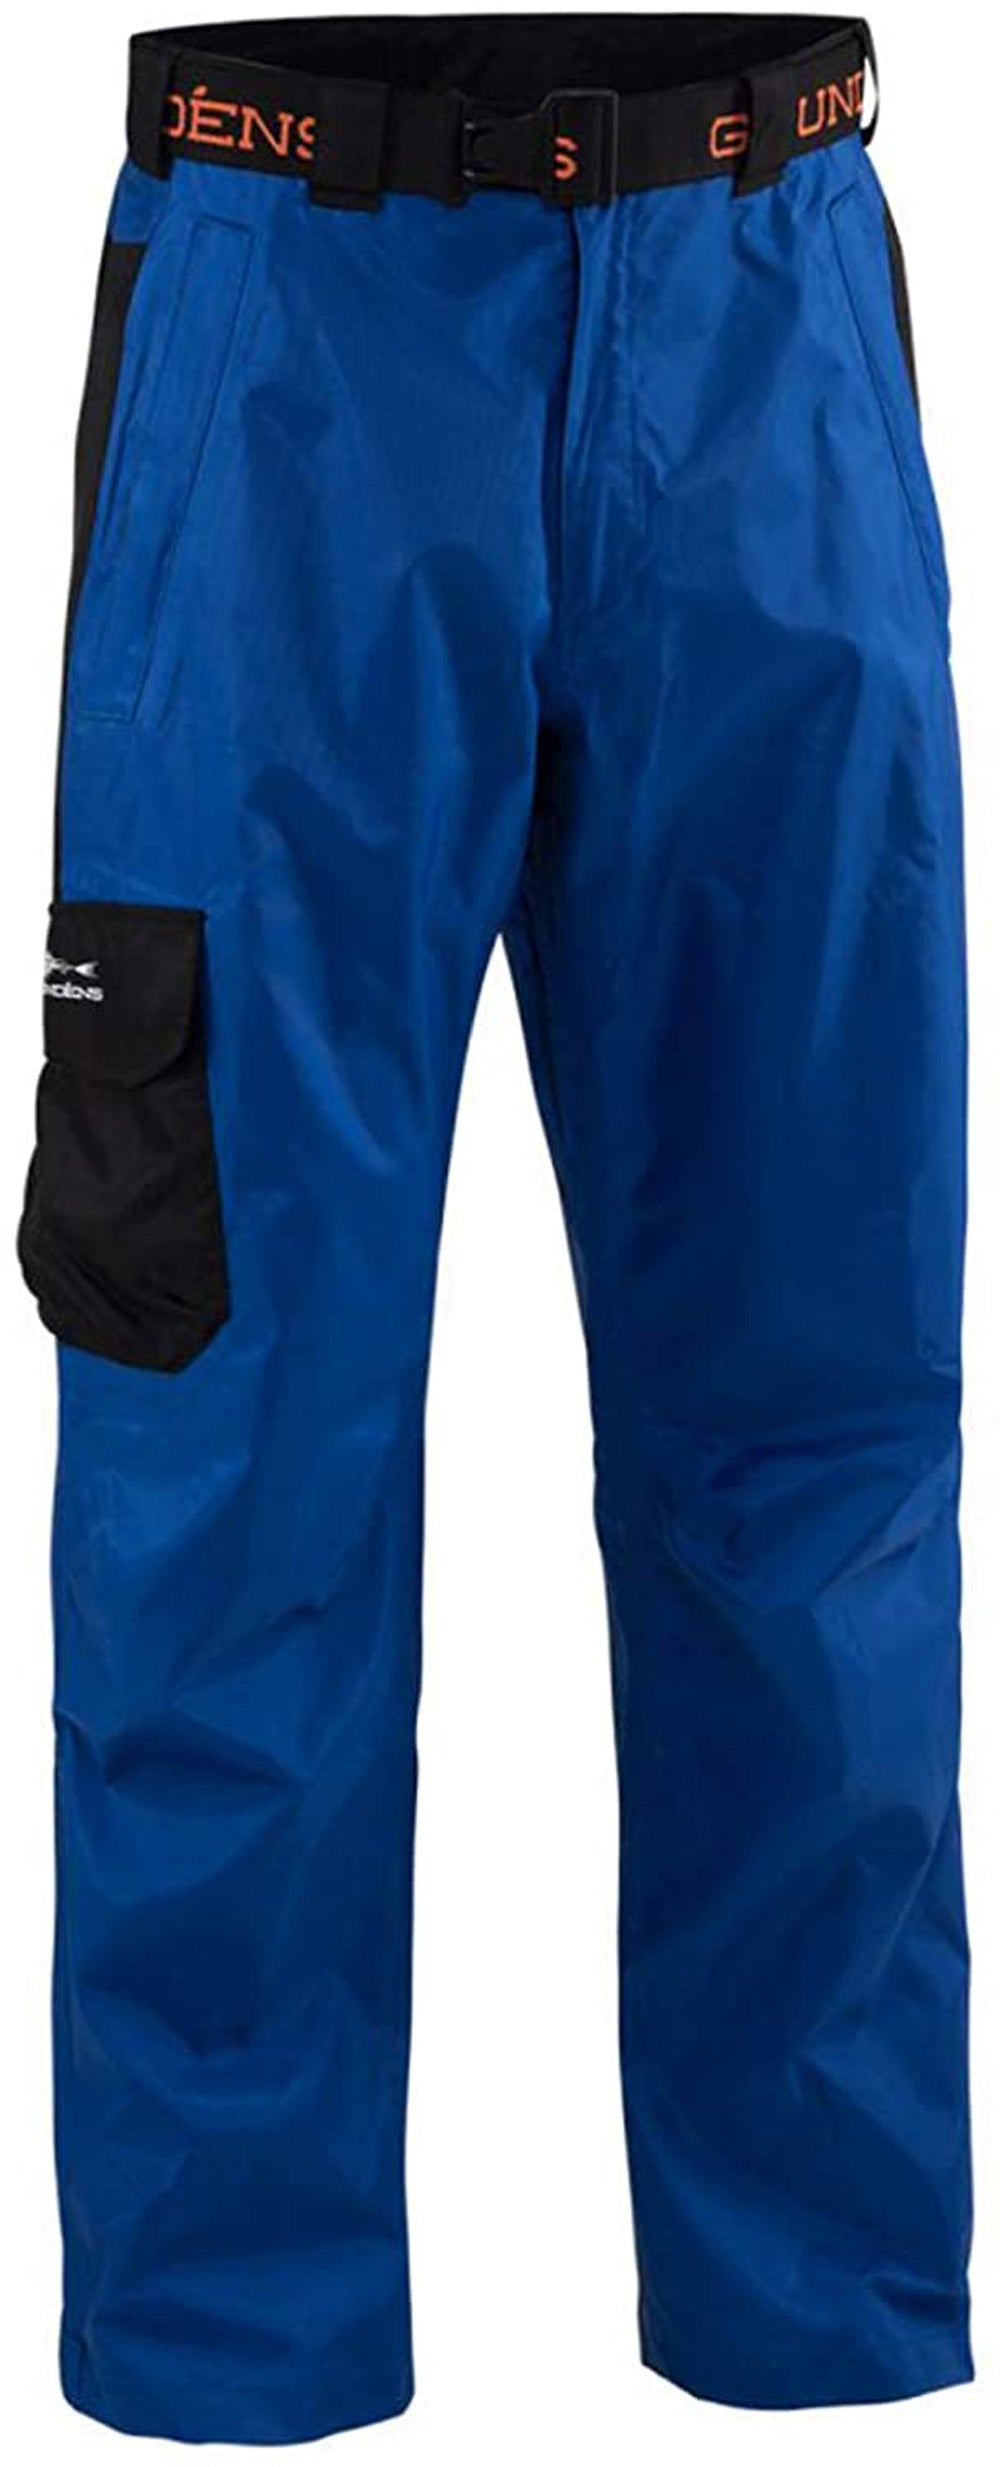 Weather Watch Pant in Glacier Blue color